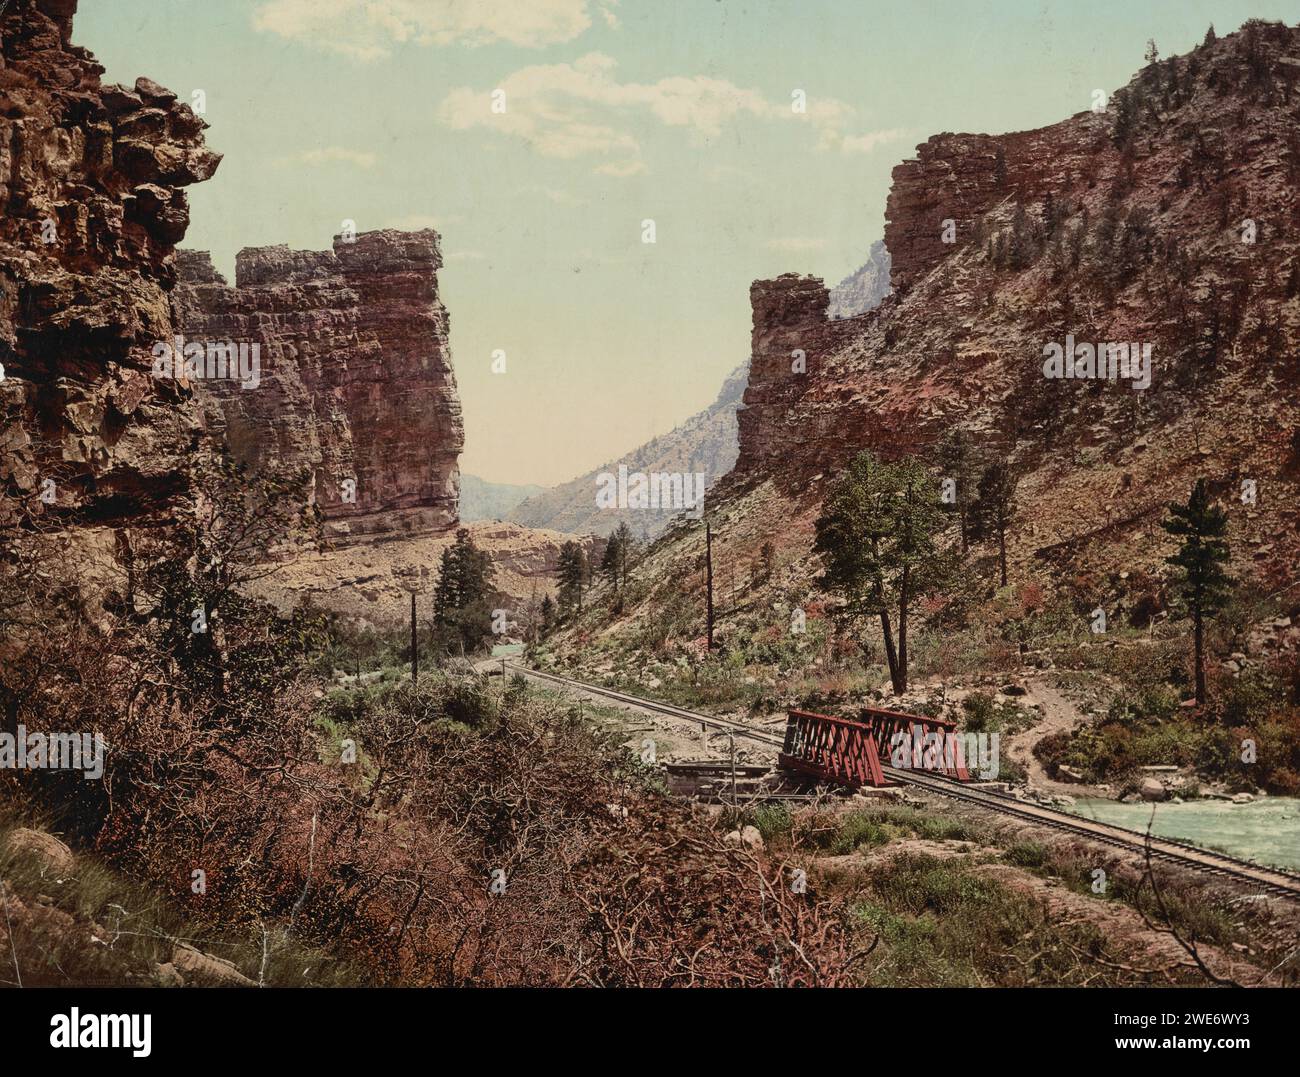 Castle Gate, Price Canyon, Carbon County, Utah 1900. Stock Photo